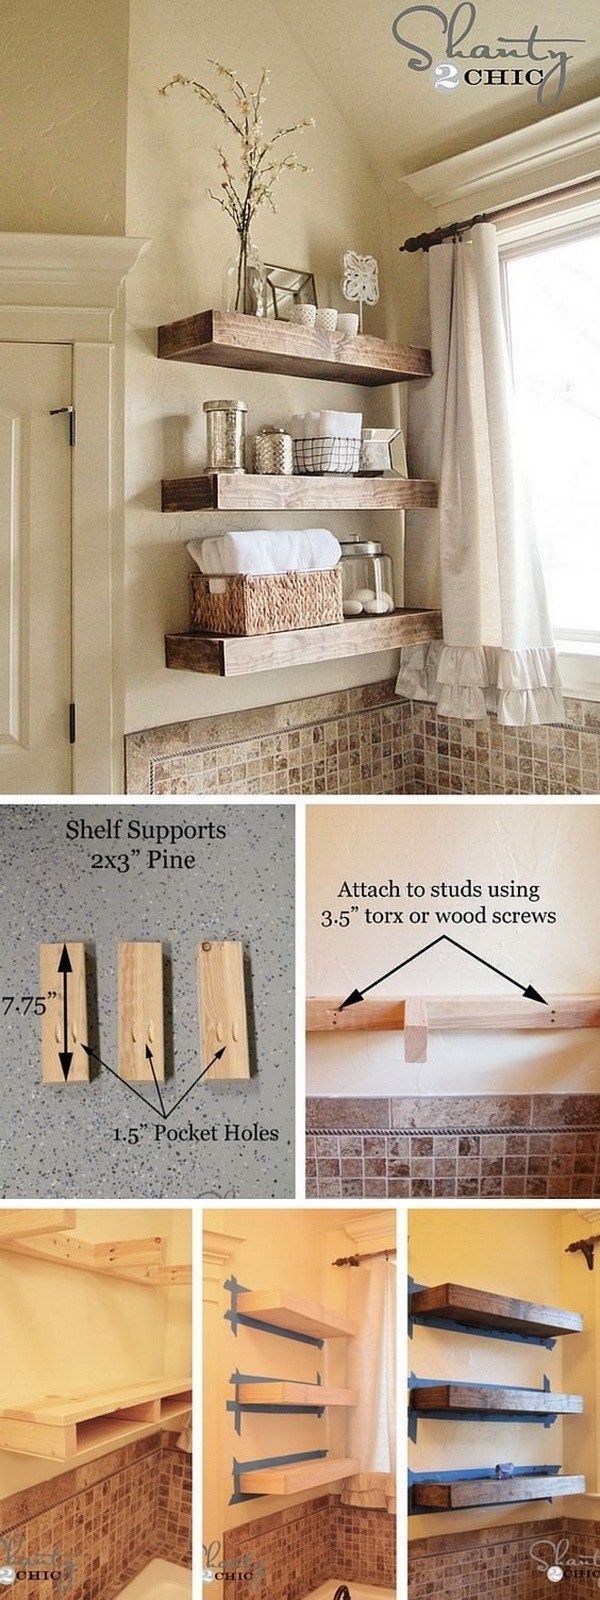 Rustic DIY Projects to add Warmth to your Farmhouse Decor -   17 diy projects Storage house
 ideas